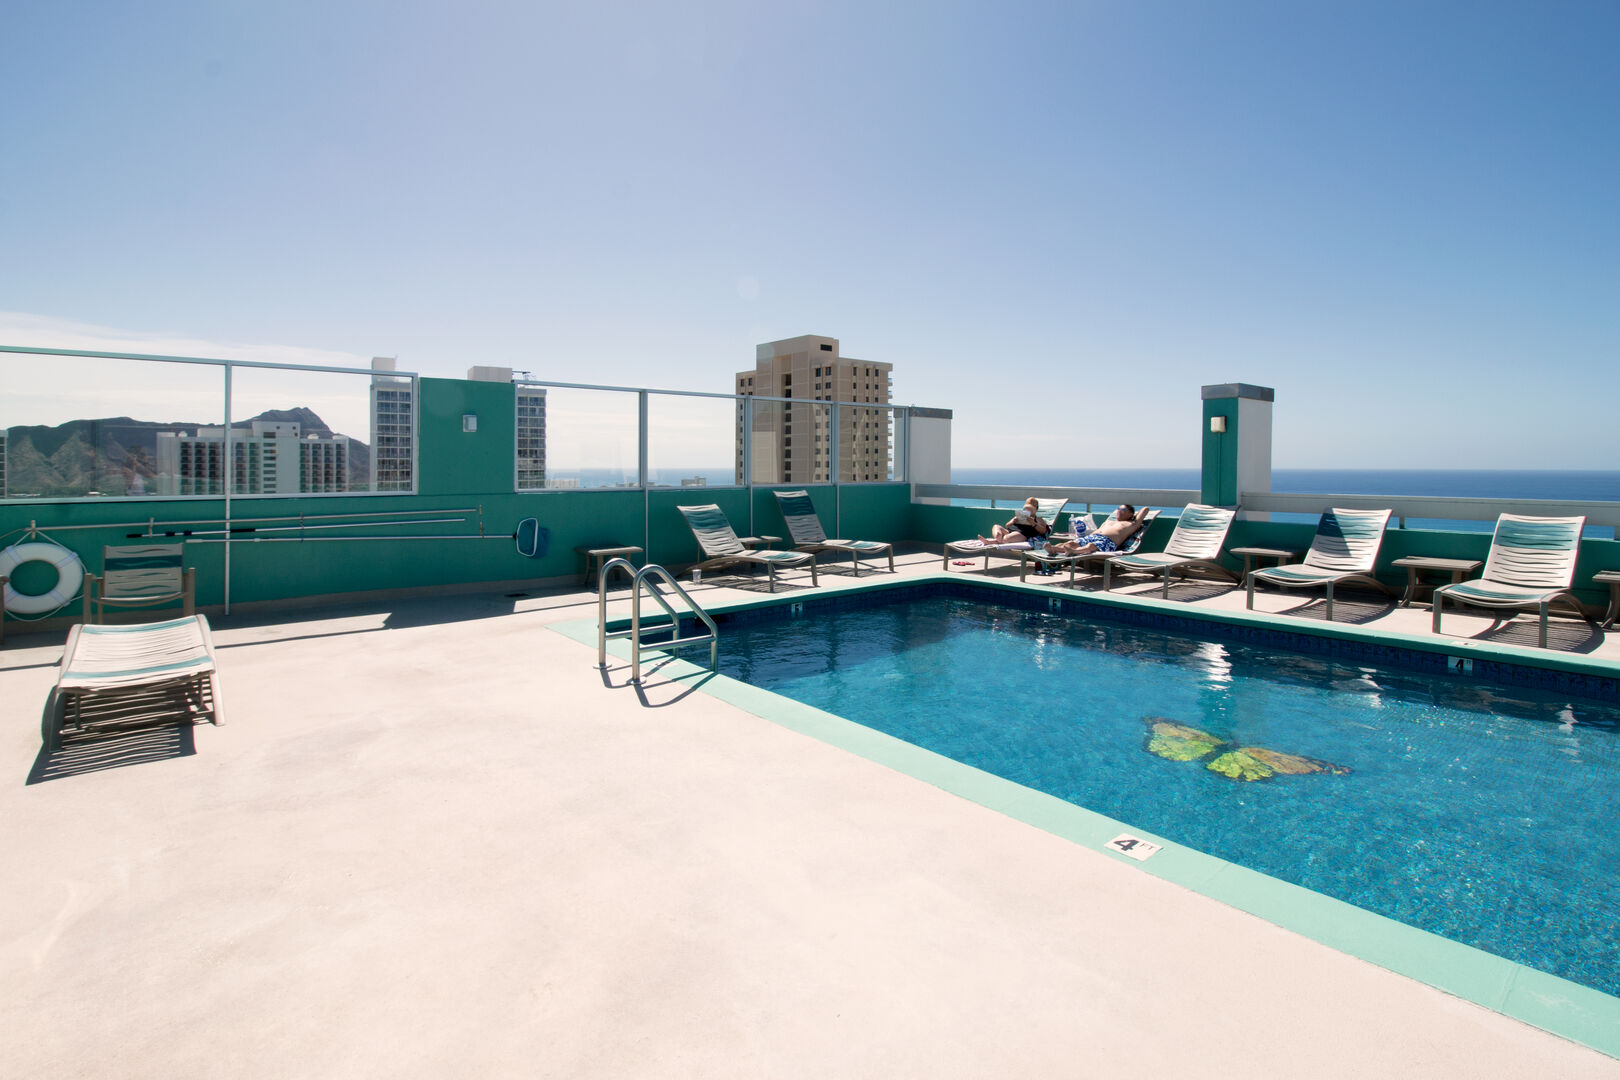 Swimming pool on the rooftop with ocean view!